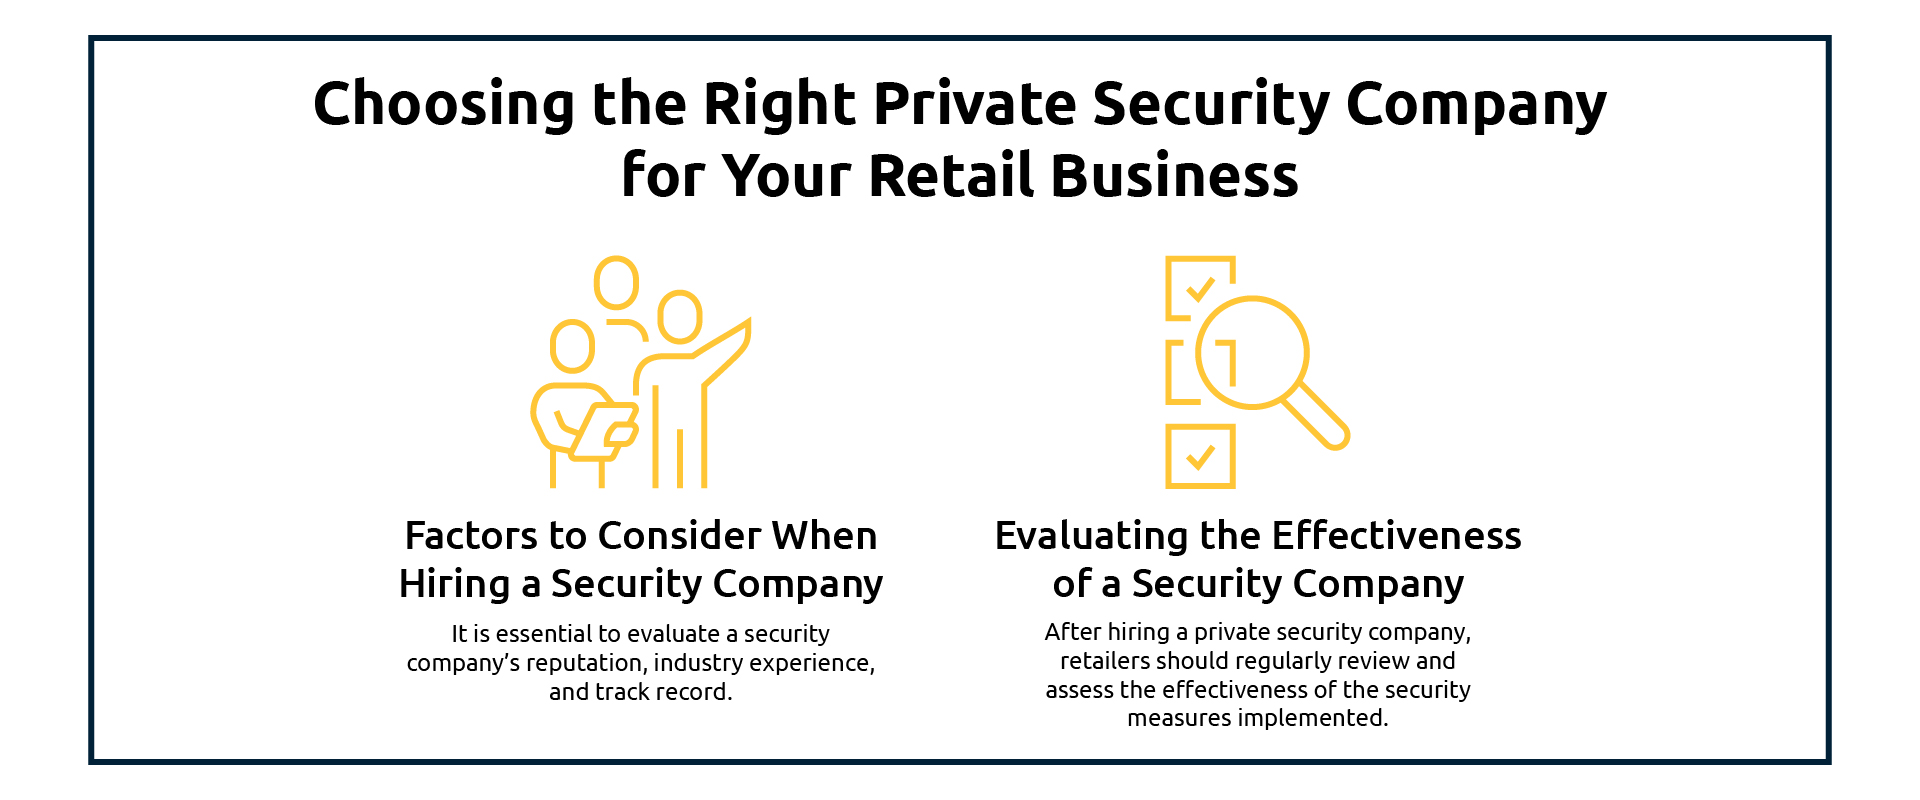 Choosing the Right Private Security Company for Your Retail Business